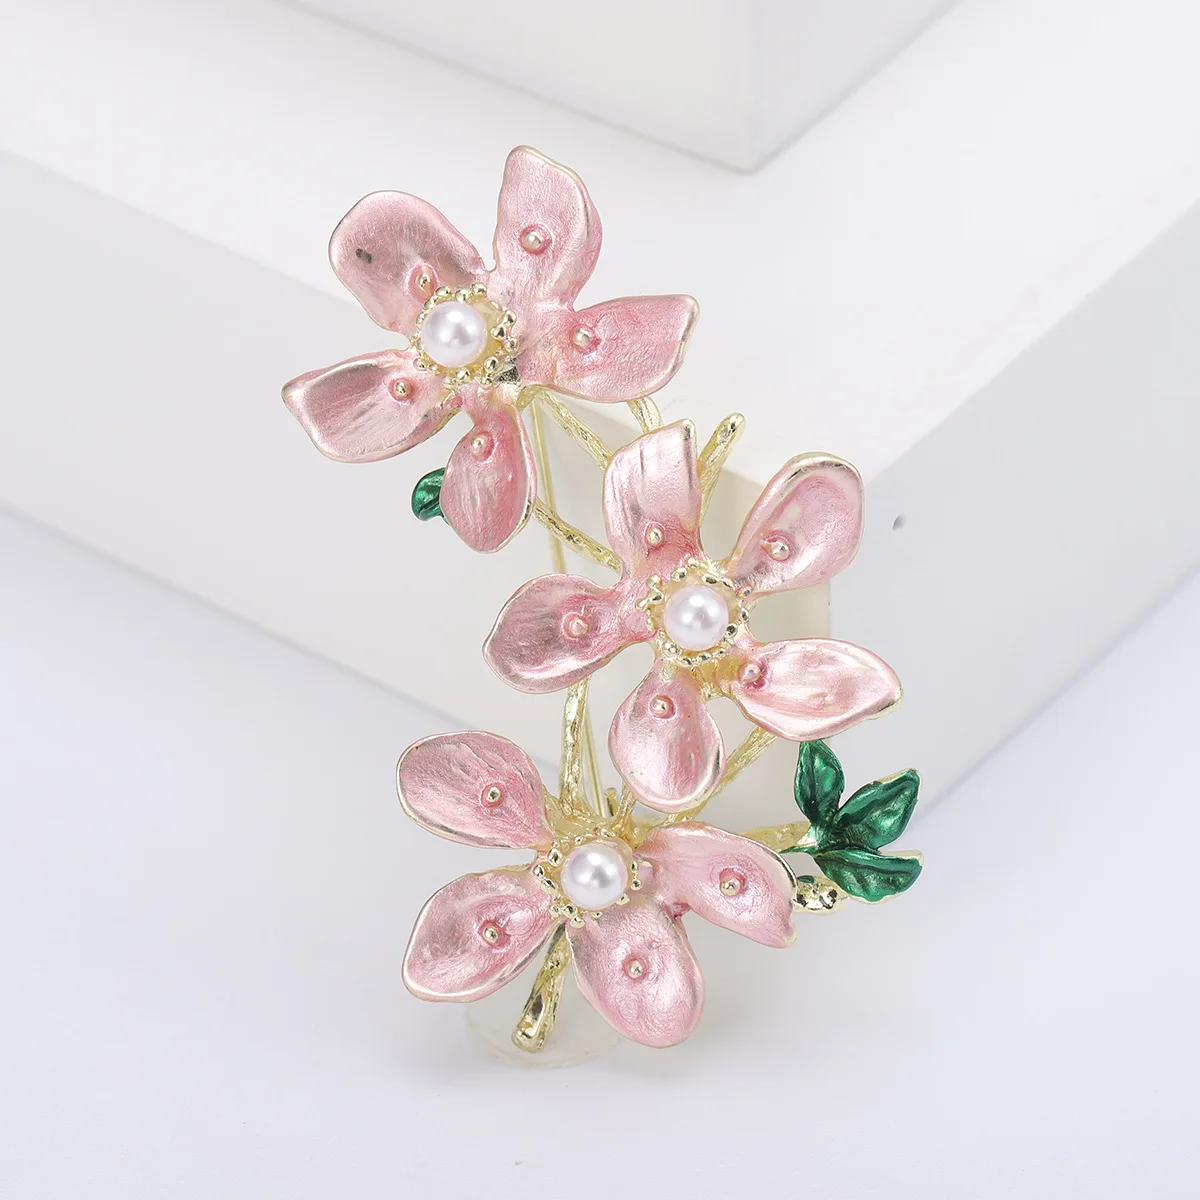 

Pearl Peach Blossom Flowers Brooches For Women Pretty Plants Wedding Party Office Bouquet DIY Clothing Suit Pin Jewelry Gifts